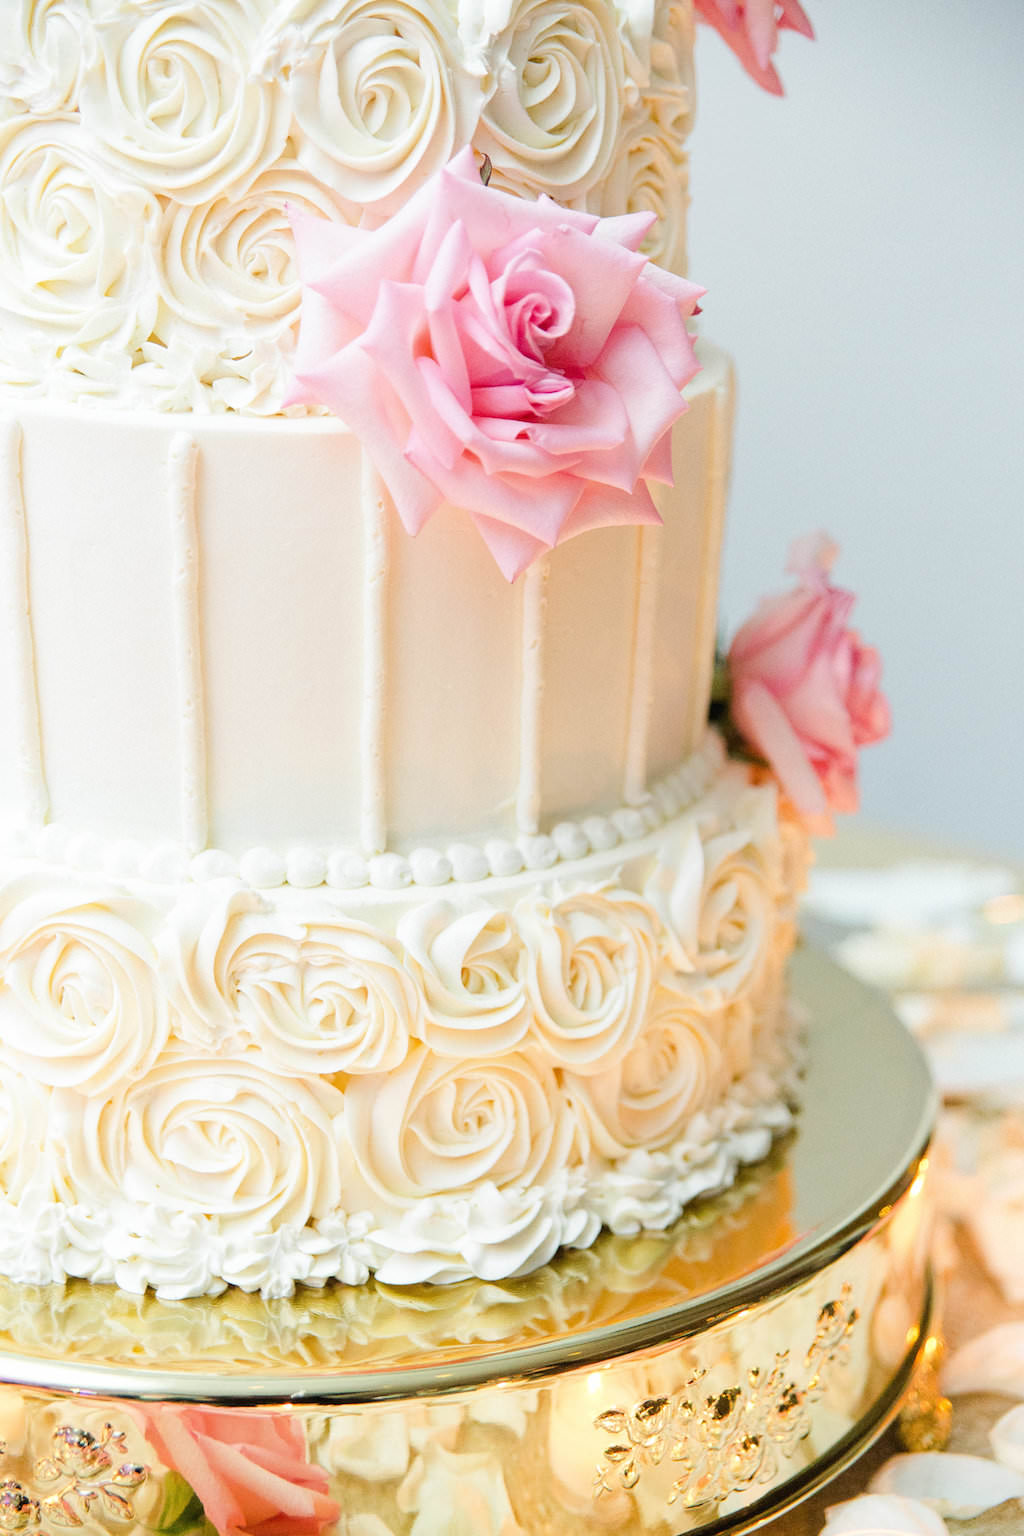 Elegant, Classic Four Tier Round White Wedding Cake with Alternating Rose and Vertical Icing and Pink Roses and Ivory Rose Petals on Gold Cake Stand | Wedding Cake Baker The Vinoy Renaissance